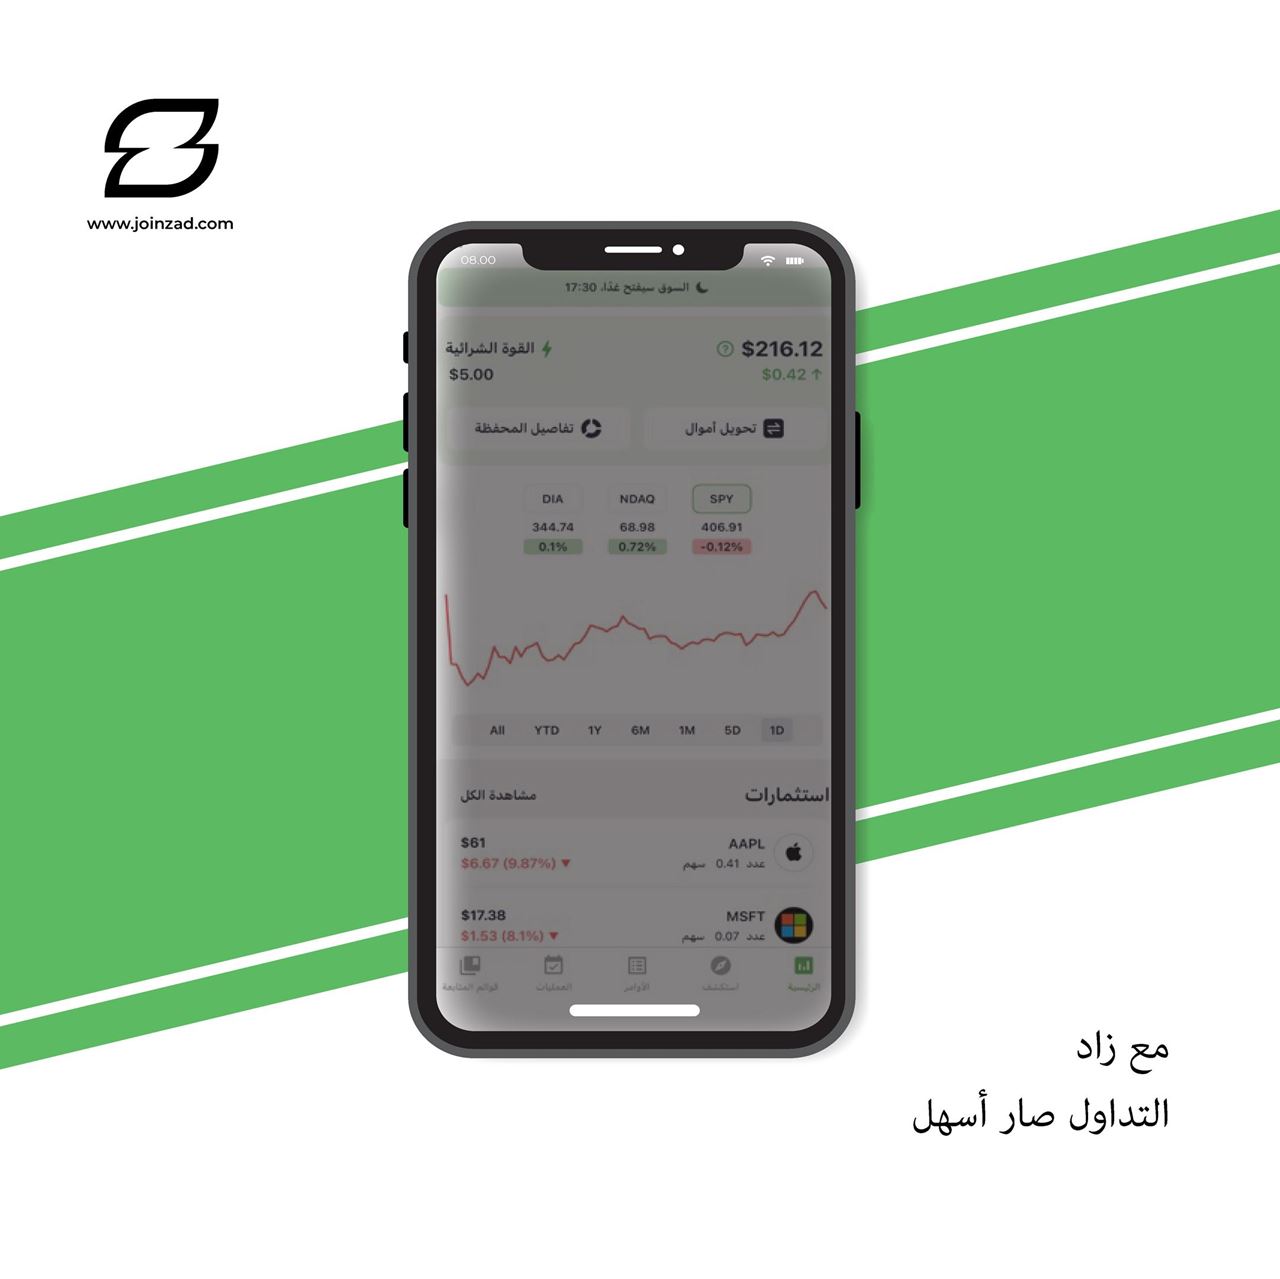 Zad: Kuwait’s first Shariah-compliant fintech platform making investment accessible to all